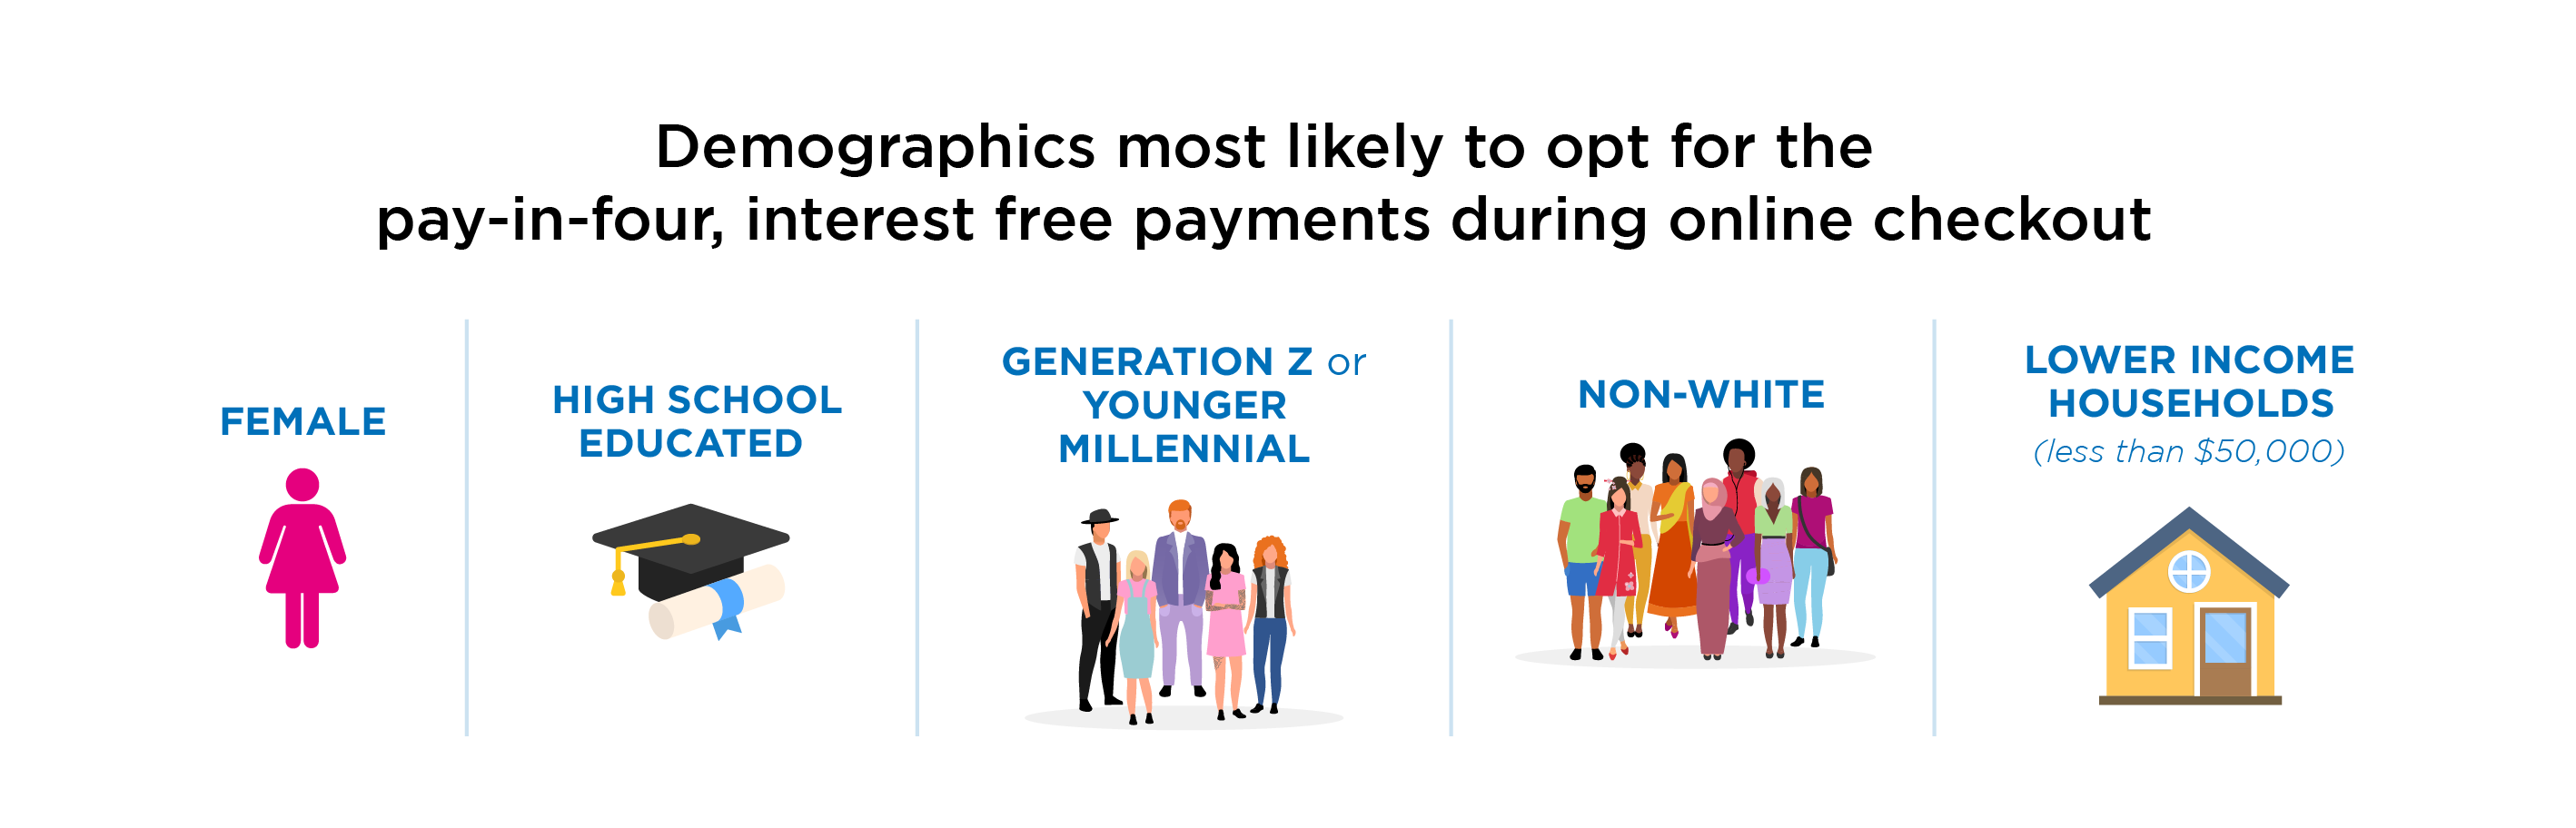 Common BNPL users: Female, high school educated, Generation Z or younger Millennial, non-white, or lower income households (less than $50,000) are all demographics most likely to opt for the pay-in-four, interest free payments during online checkout.